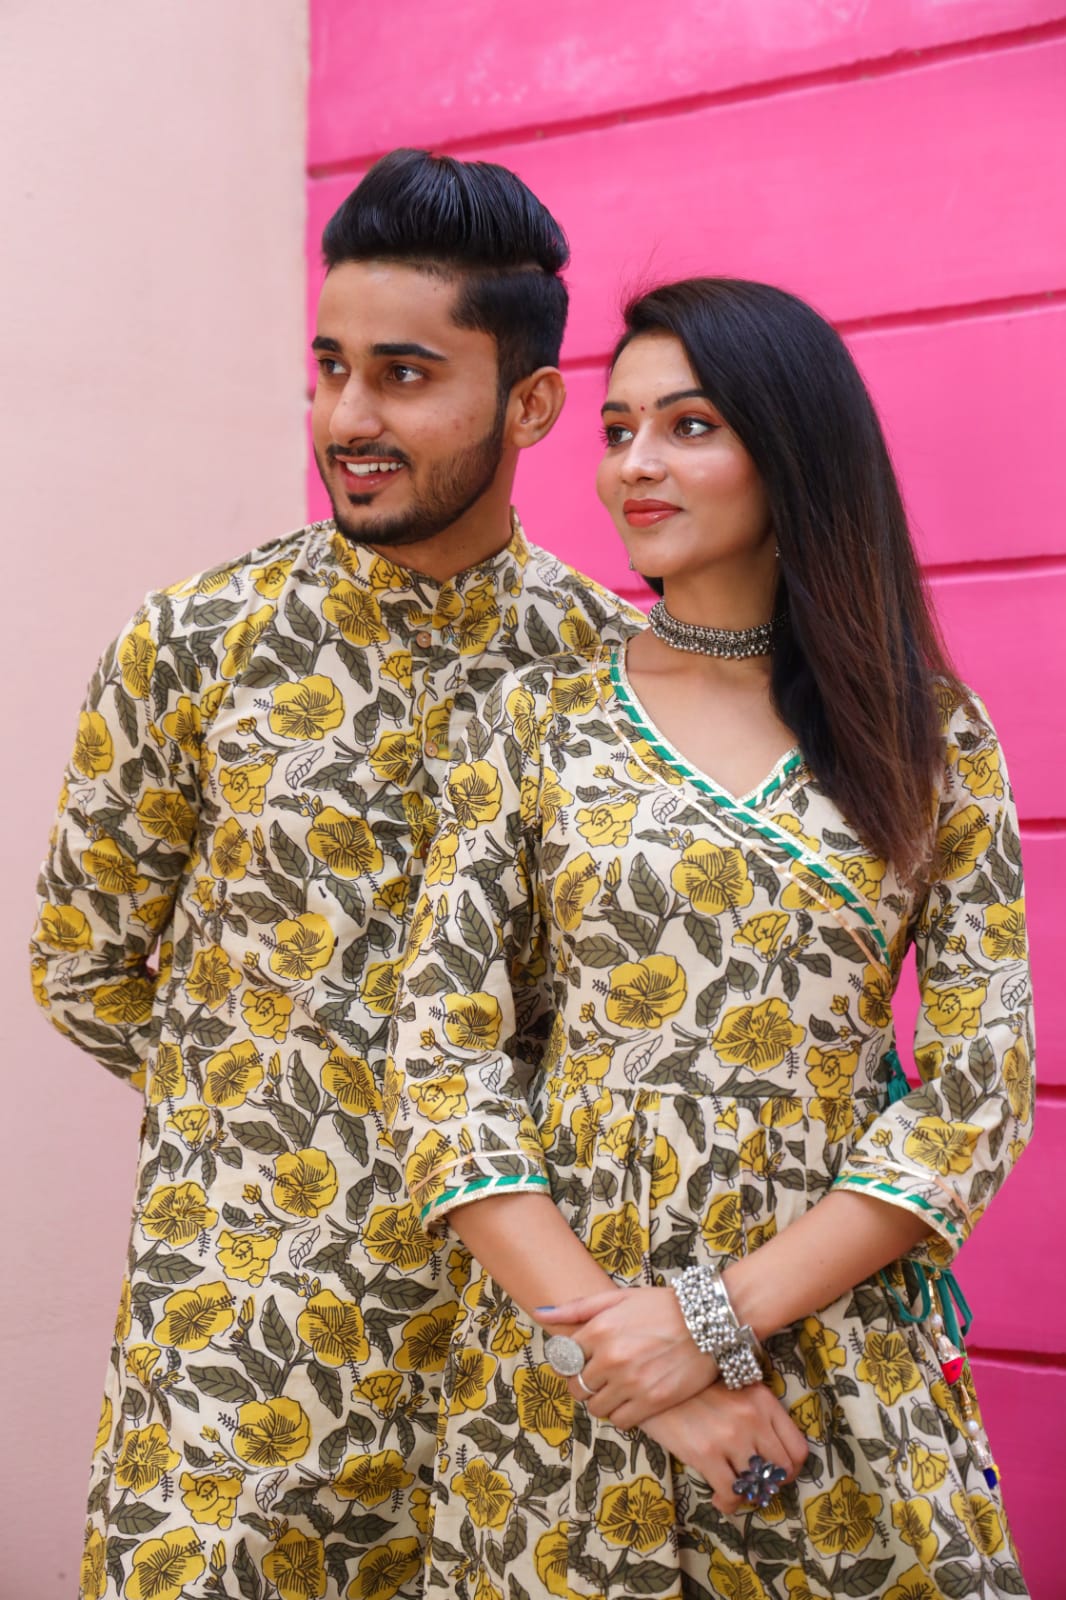 Buy Couple Dress Online: Style Meets Togetherness | Couple dress, Set  saree, Dresses online